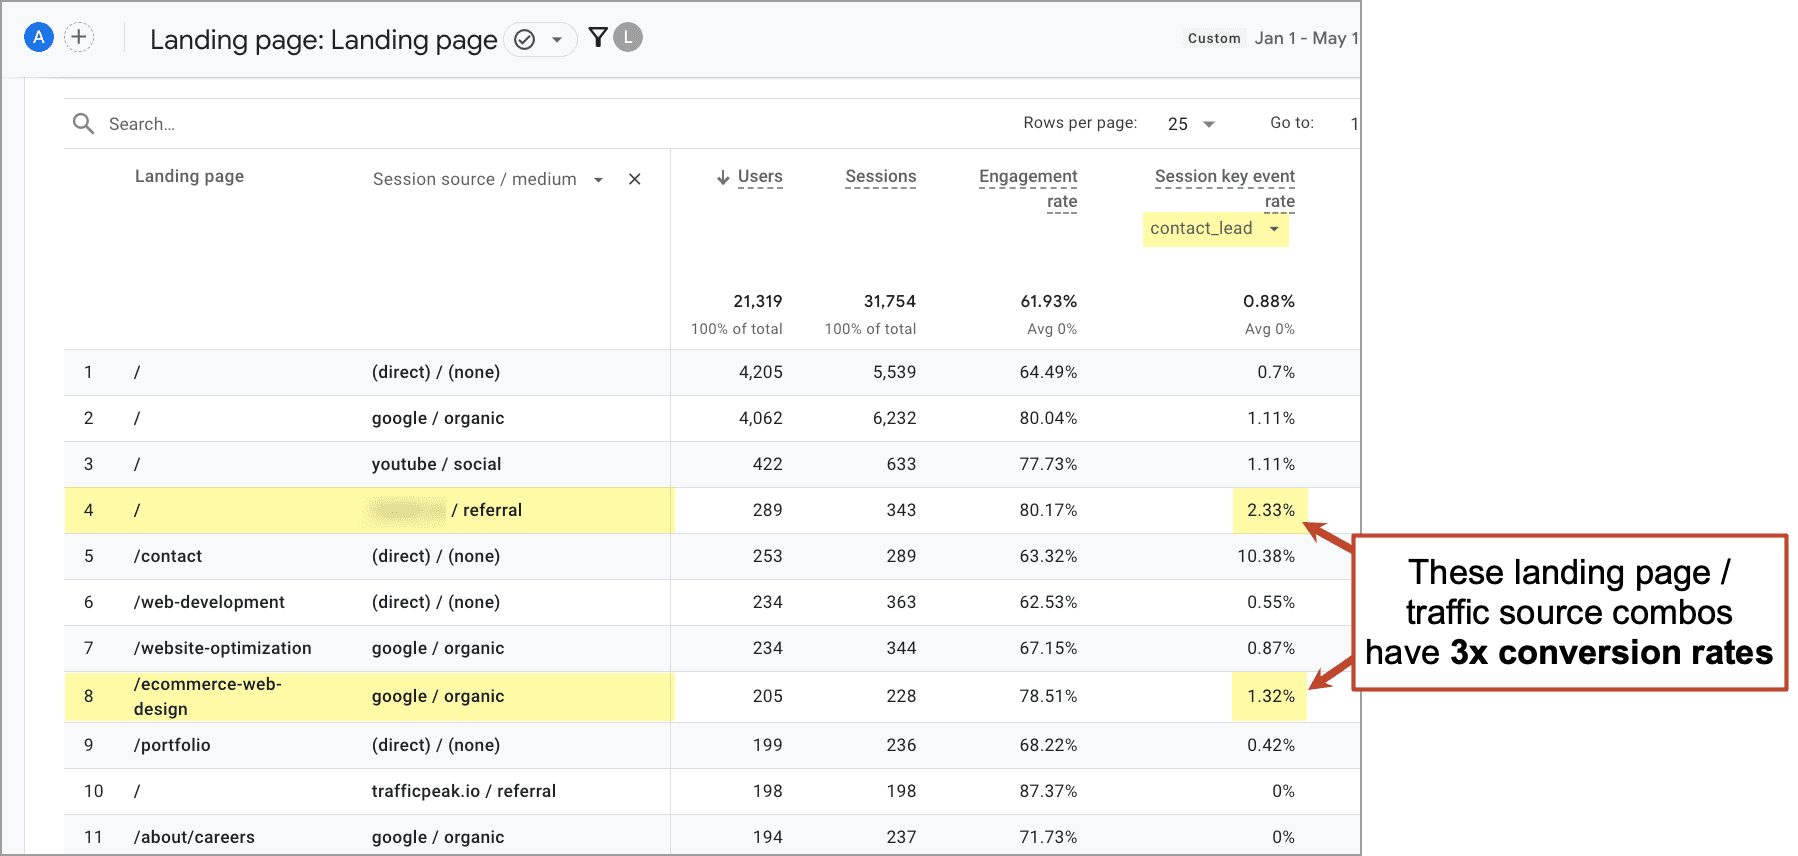 Screenshot of a Google Analytics landing page report highlighting that referral traffic to "ecommerce-web-design" and "contact" pages have 3x conversion rates compared to other sources.